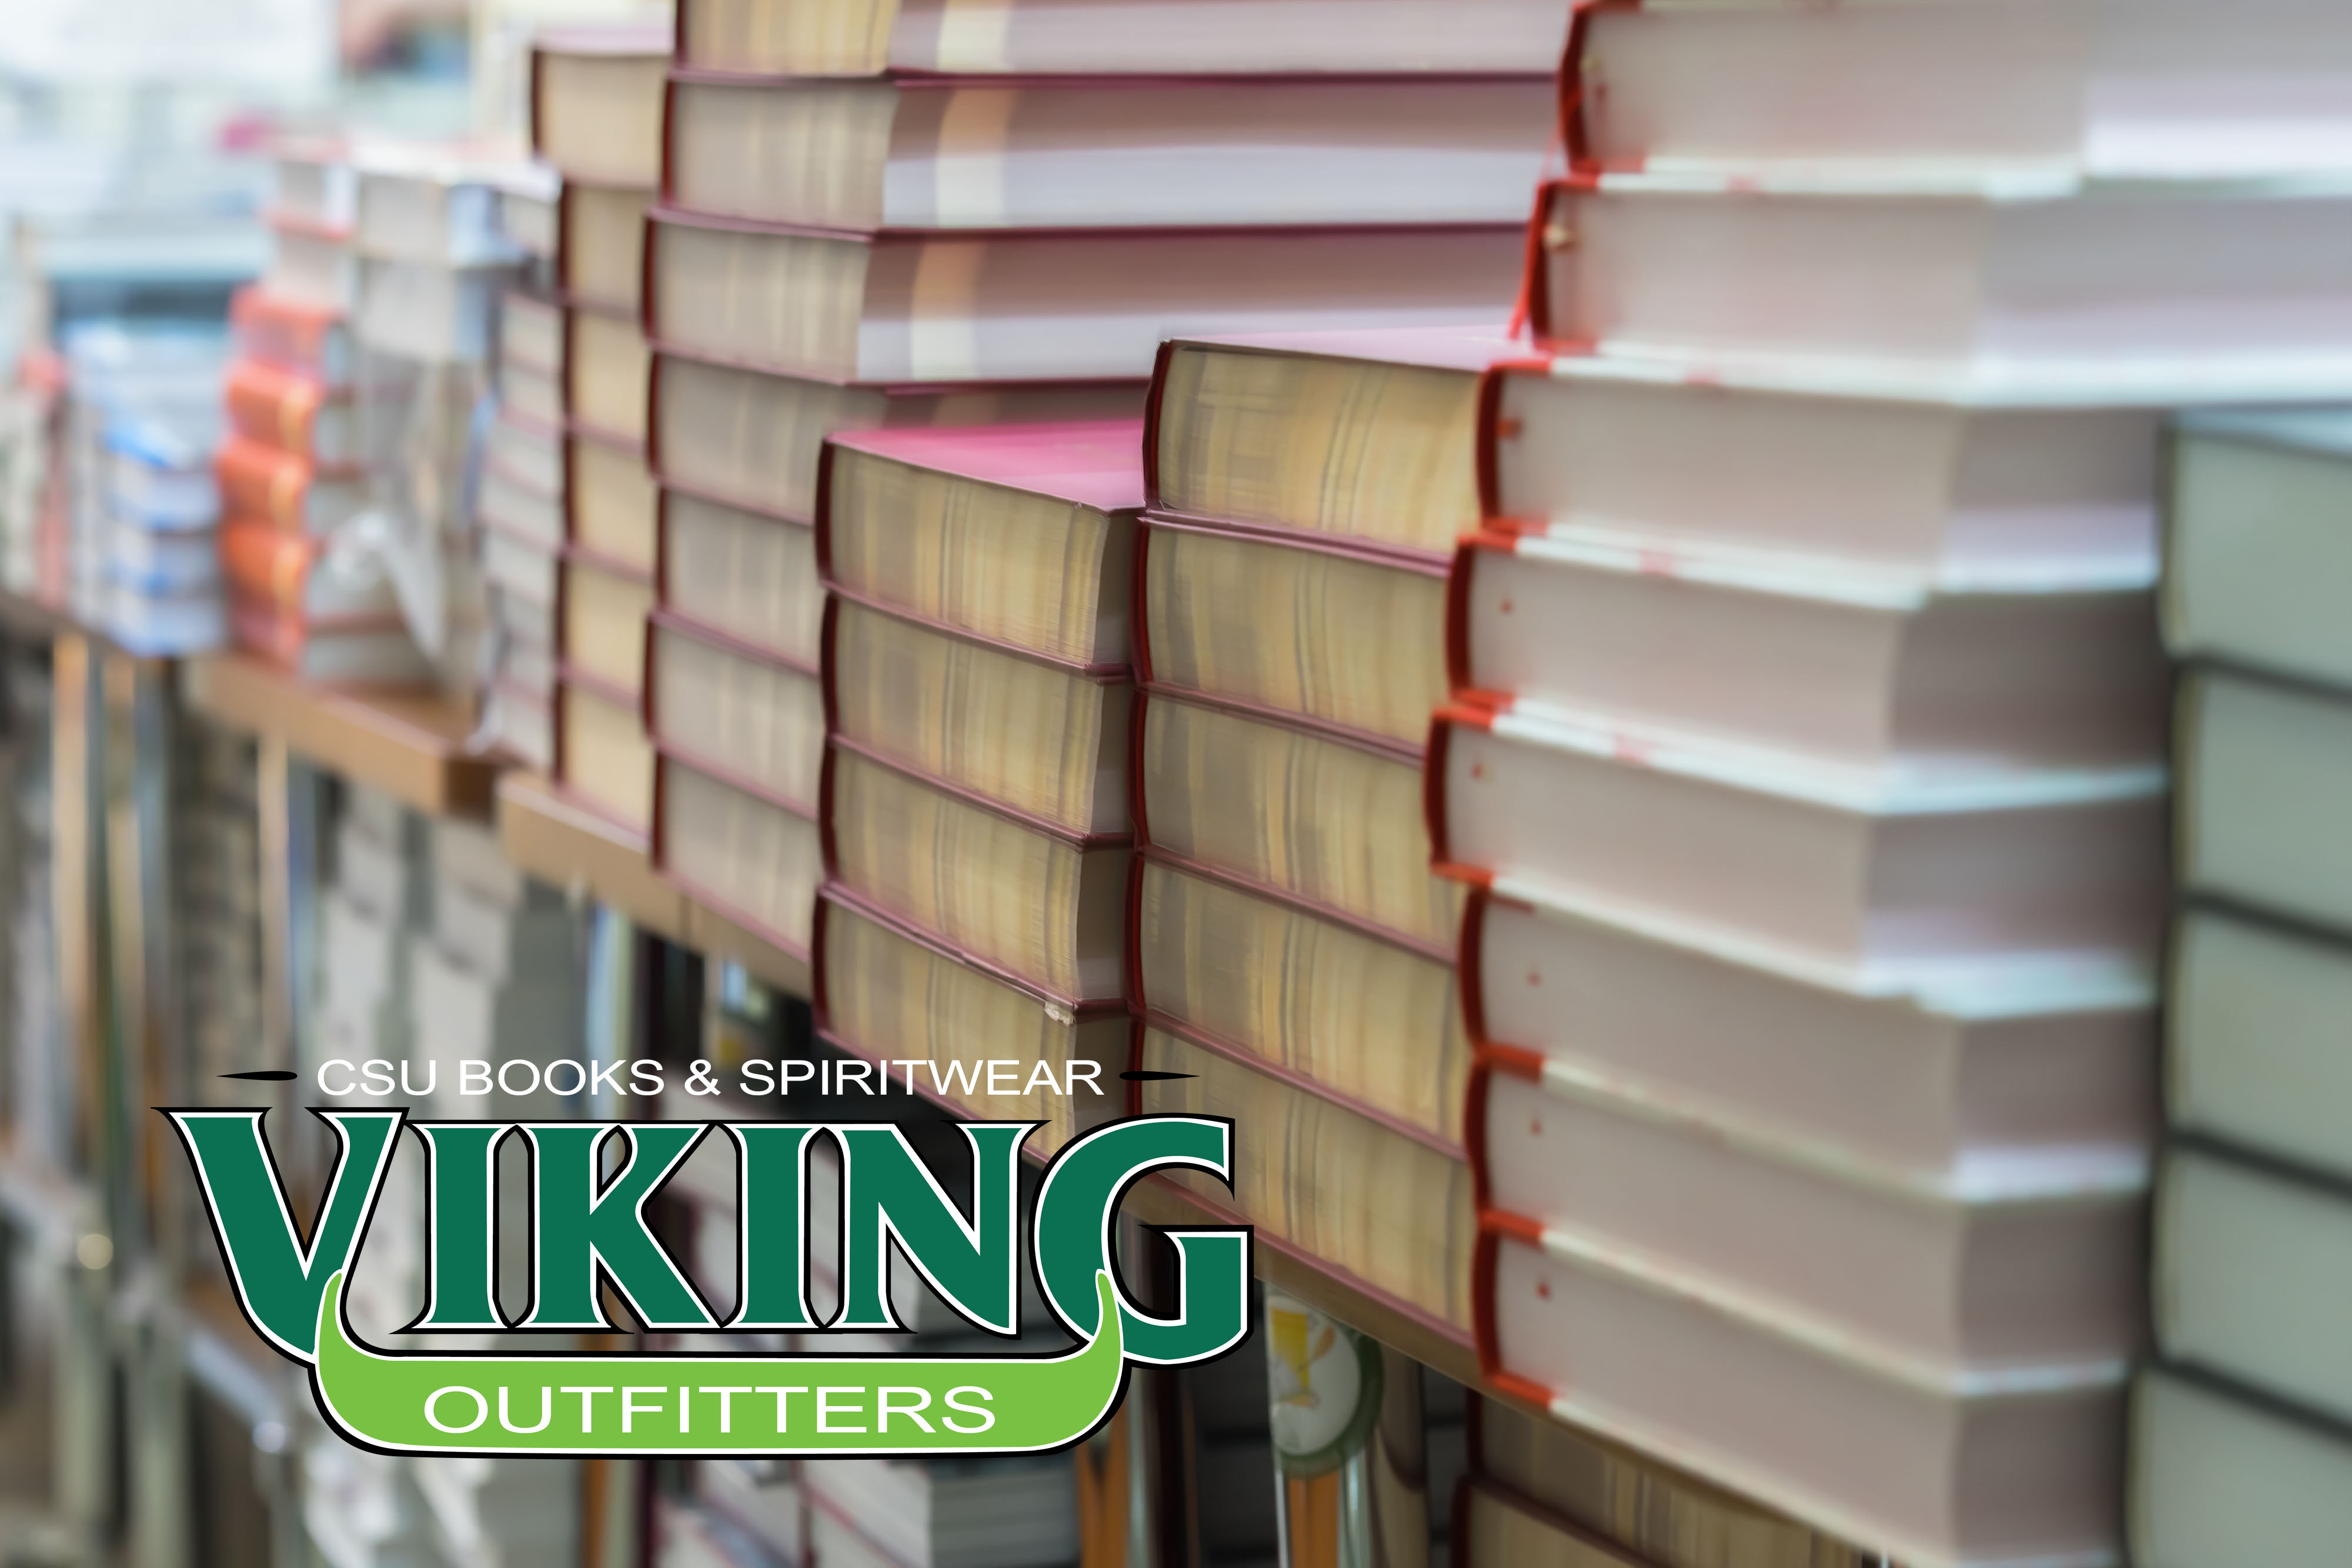 textbooks with Viking Outfitters logo